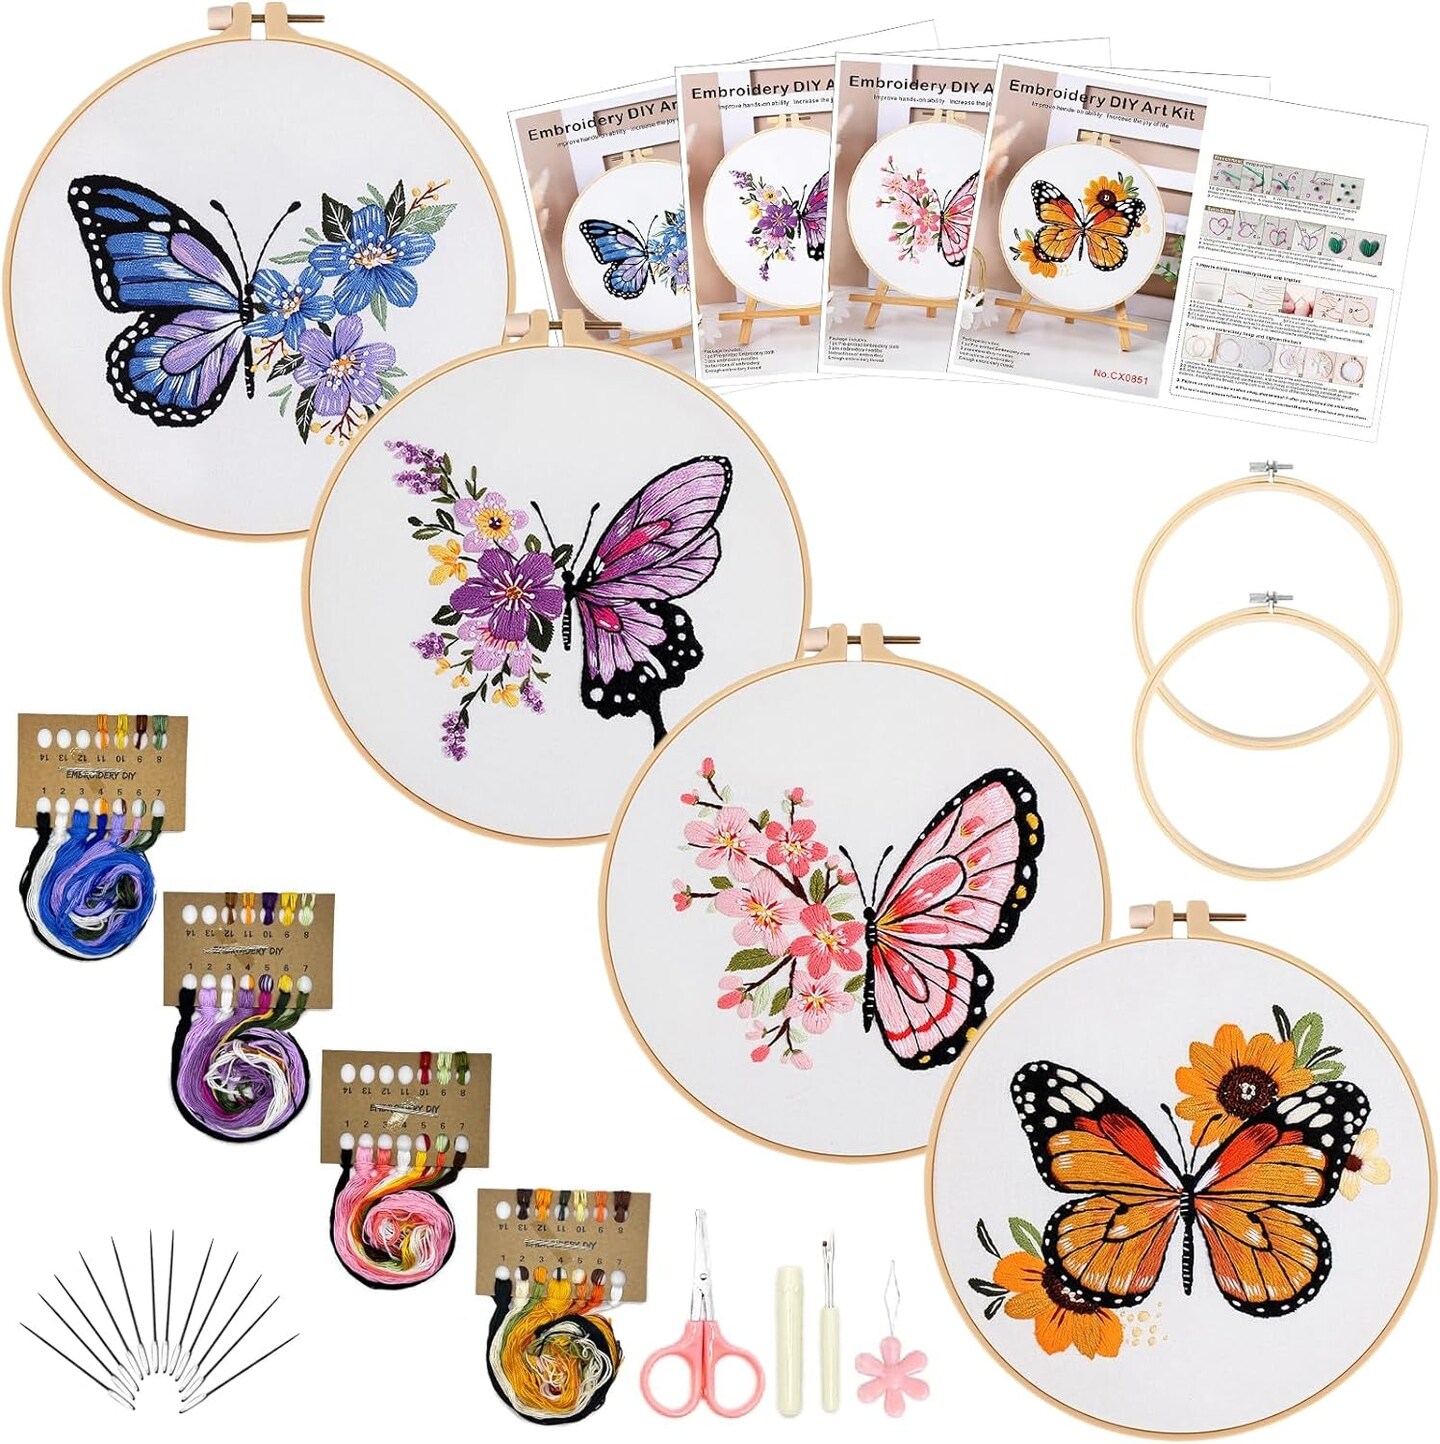 Embroidery Kit for Beginners,4 Pack Cross Stitch Kits, 2 Wooden Embroidery  Hoops,Scissors,Needles and Color Threads,Needlepoint Kit for Adult